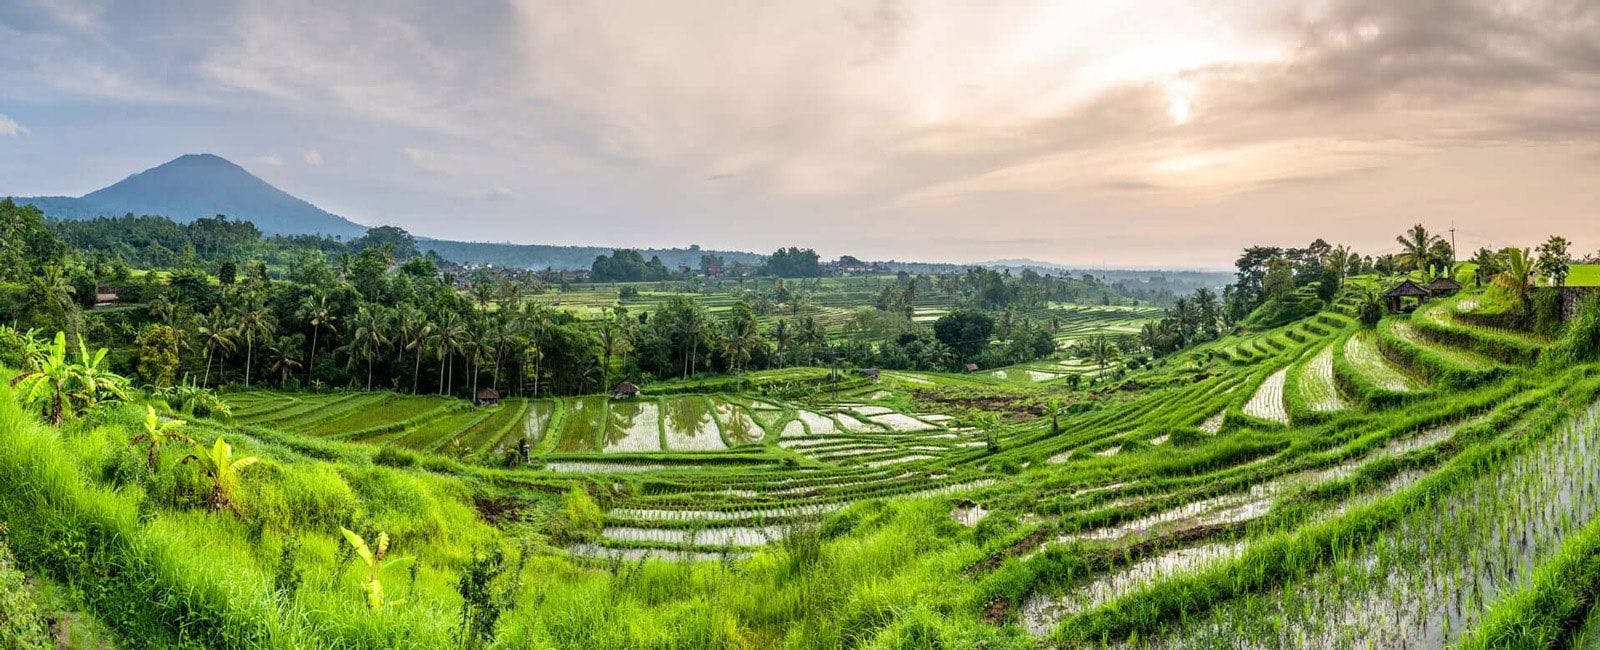 Panoramic view of rice fields in Bali